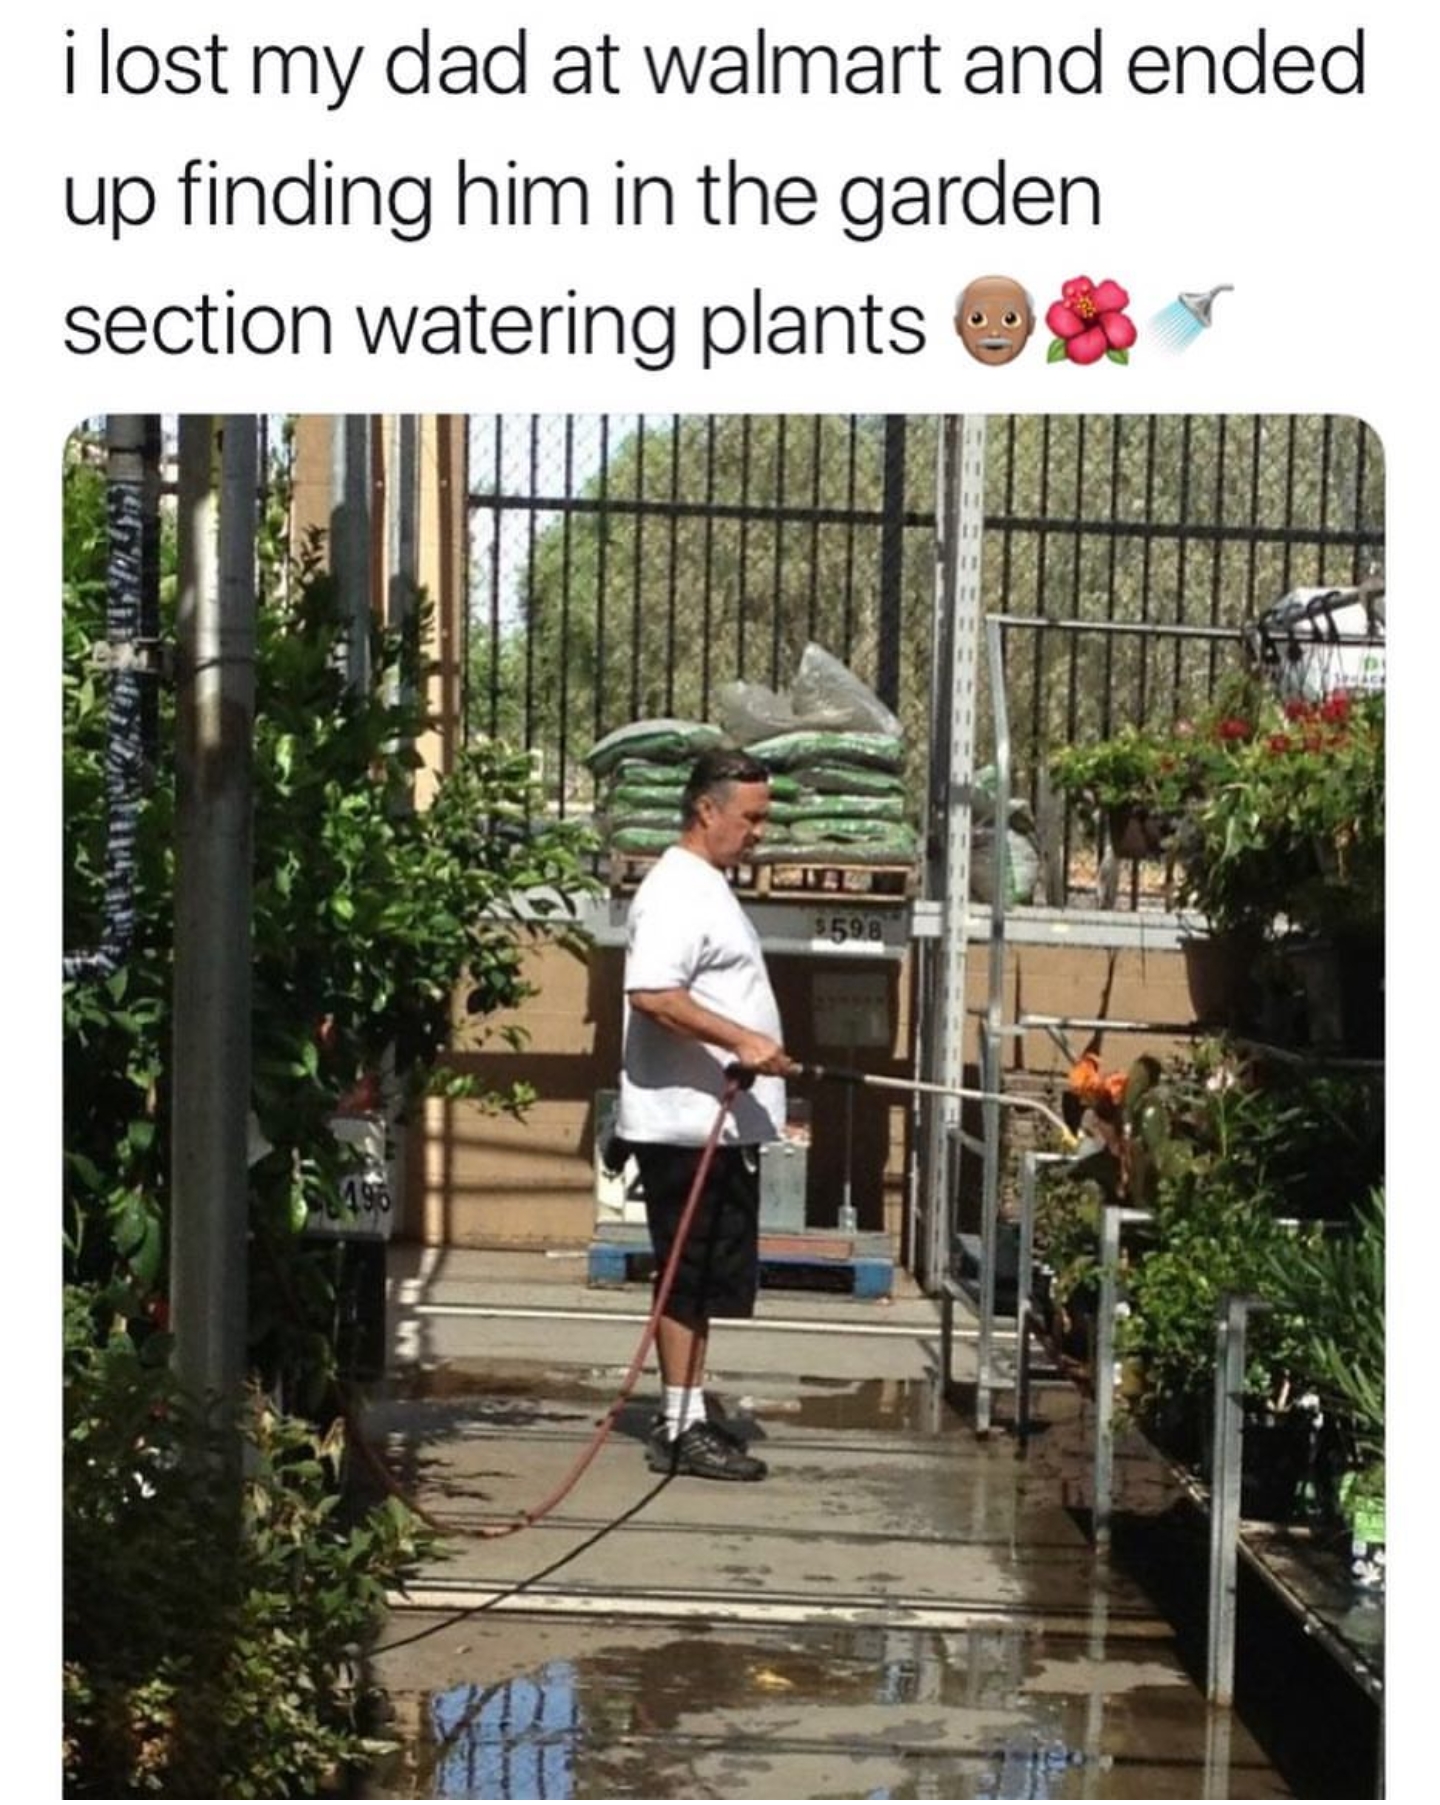 memes - watering plants meme - i lost my dad at walmart and ended up finding him in the garden section watering plants &